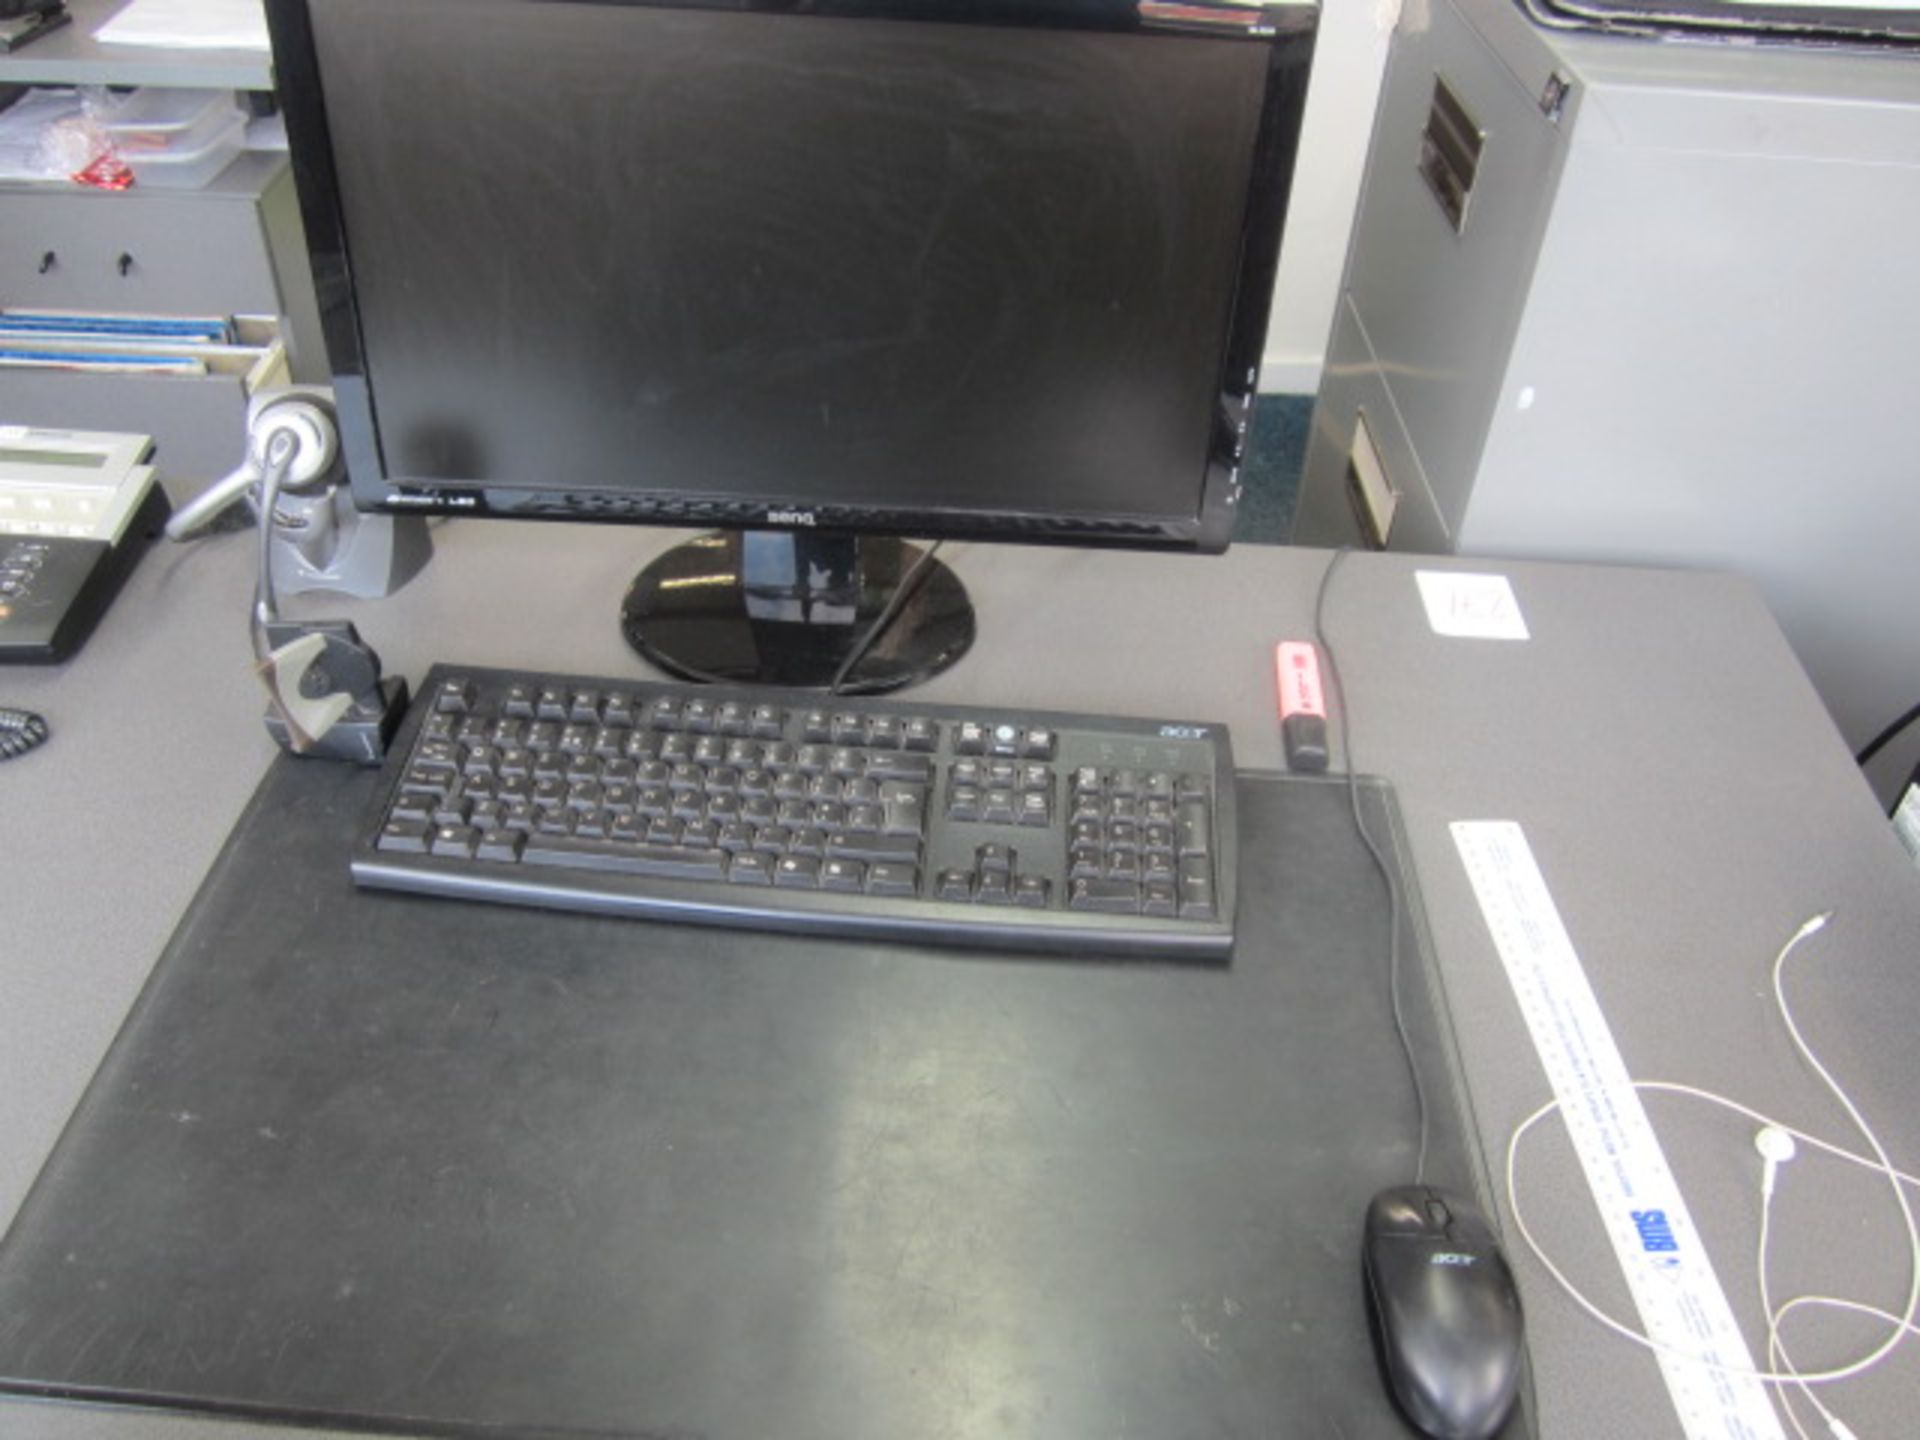 HP Elitedesk computer system with flat screen monitor, keyboard and mouse